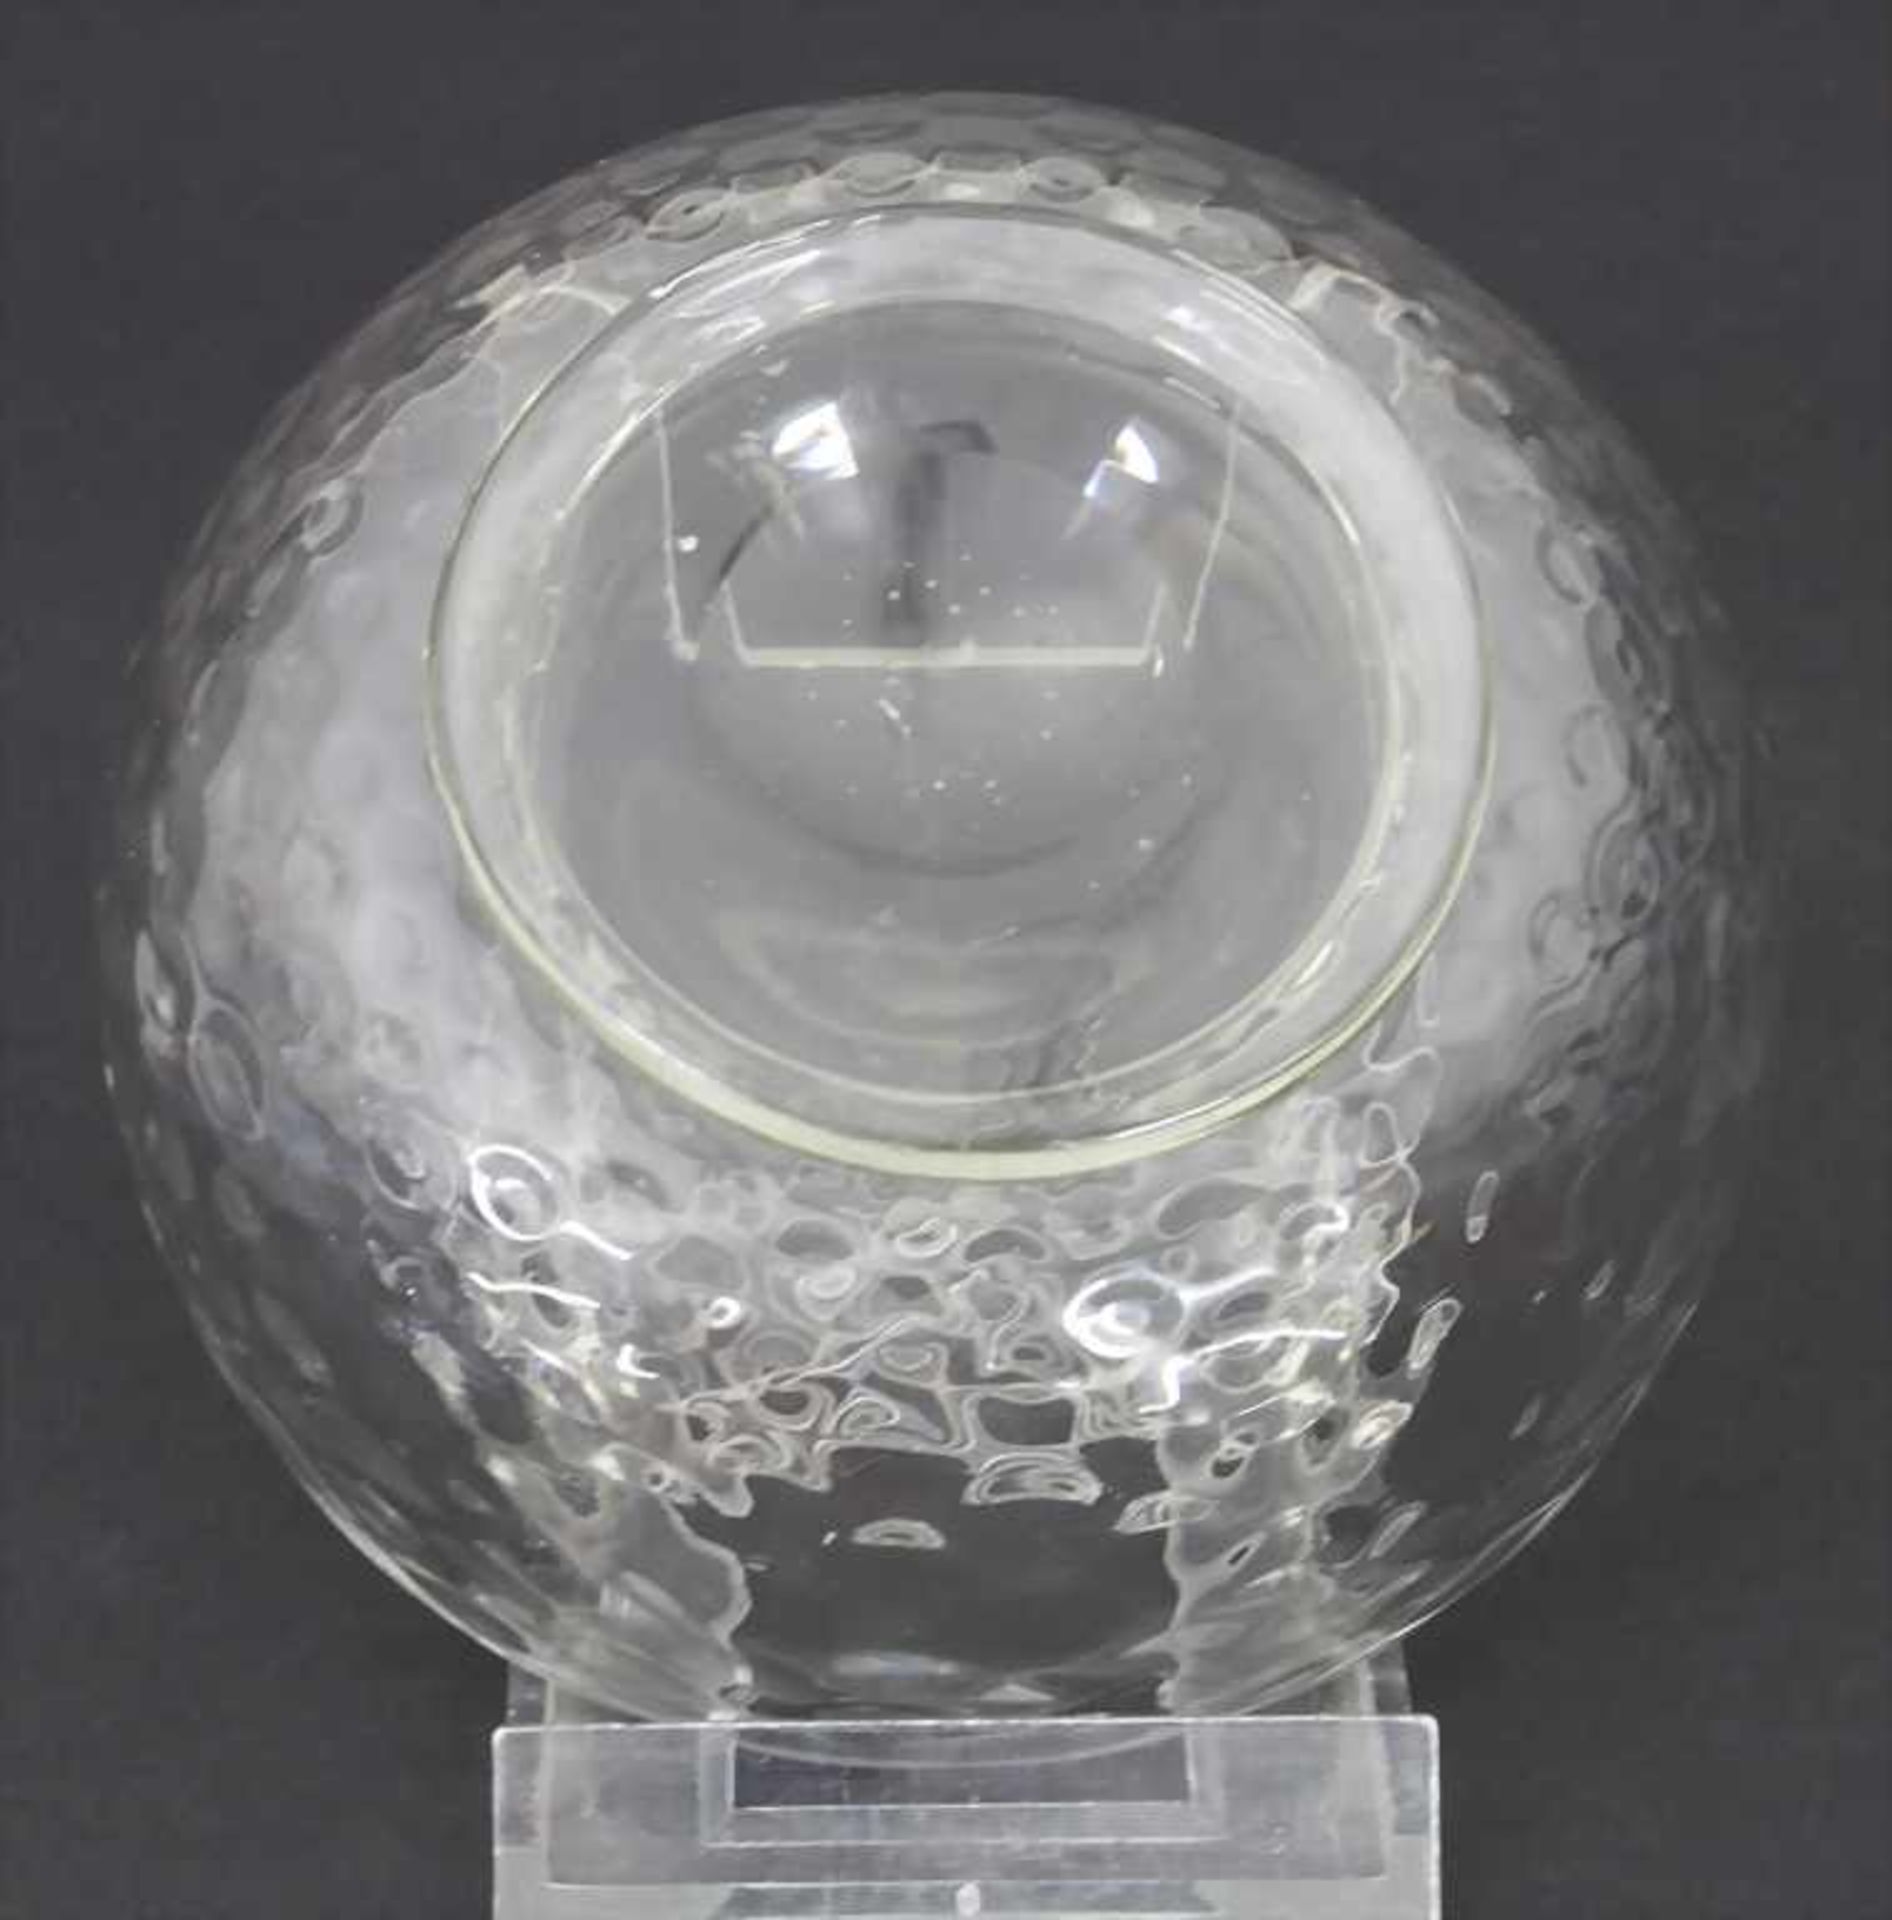 Glasschale / A glass bowl, England, 18. Jh. - Image 3 of 3